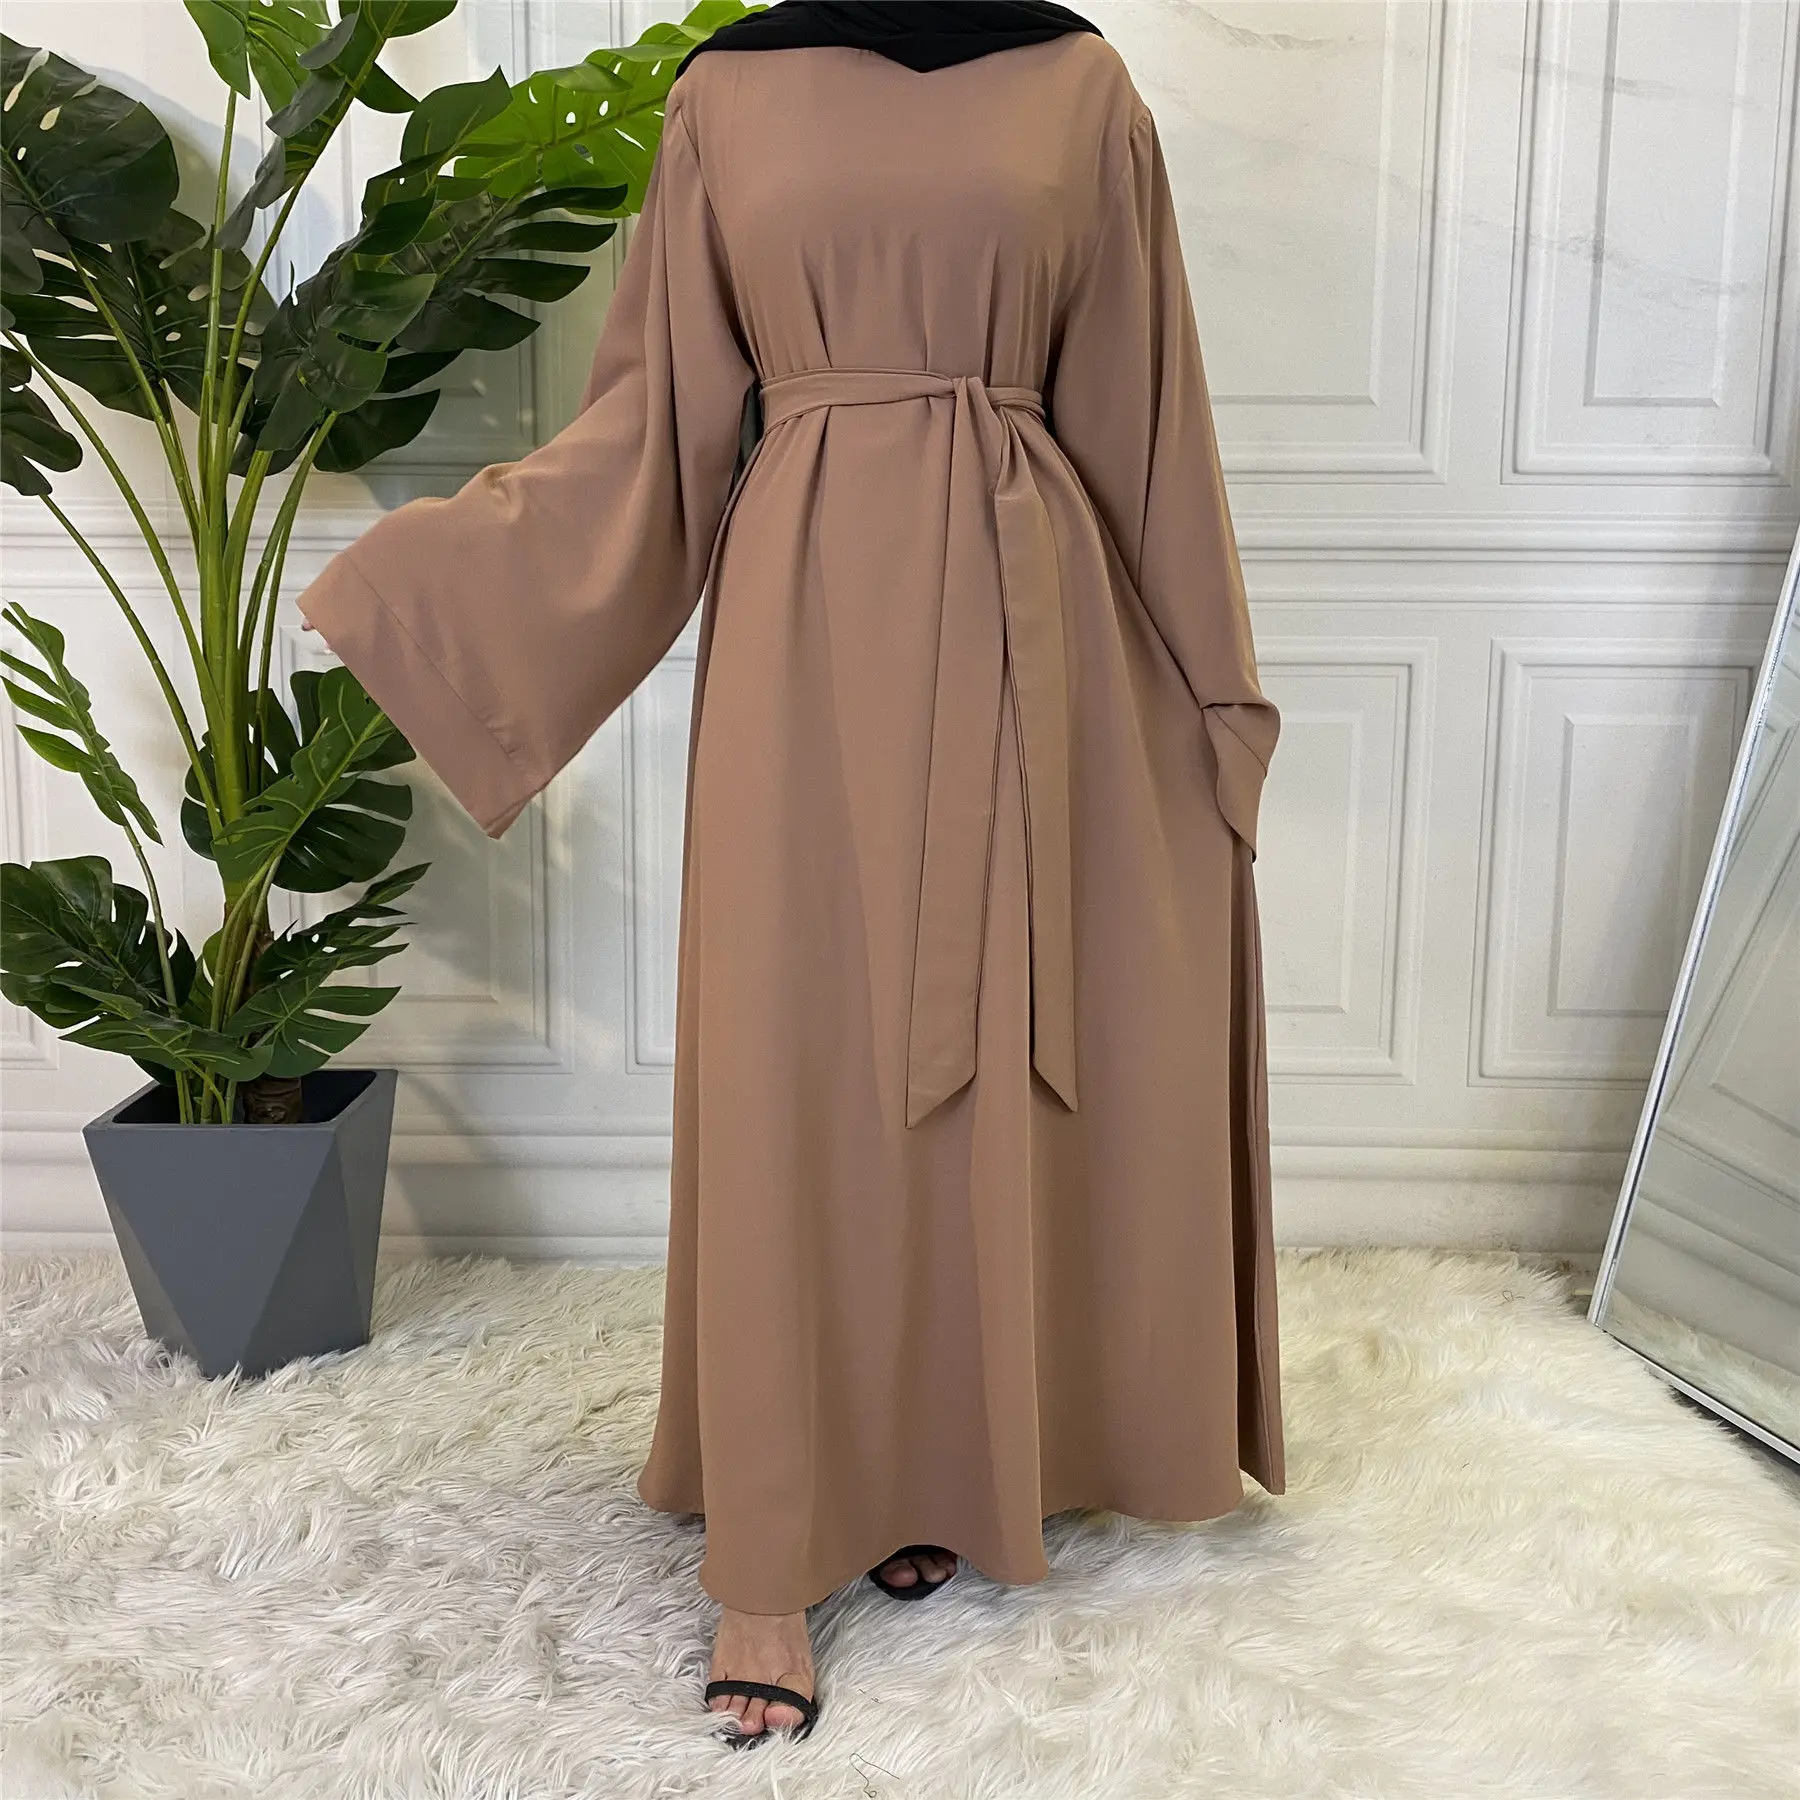 

Middle Eastern Saudi Muslim wind chiffon Hui pure color robe and ankle dress abaya, As shown in color